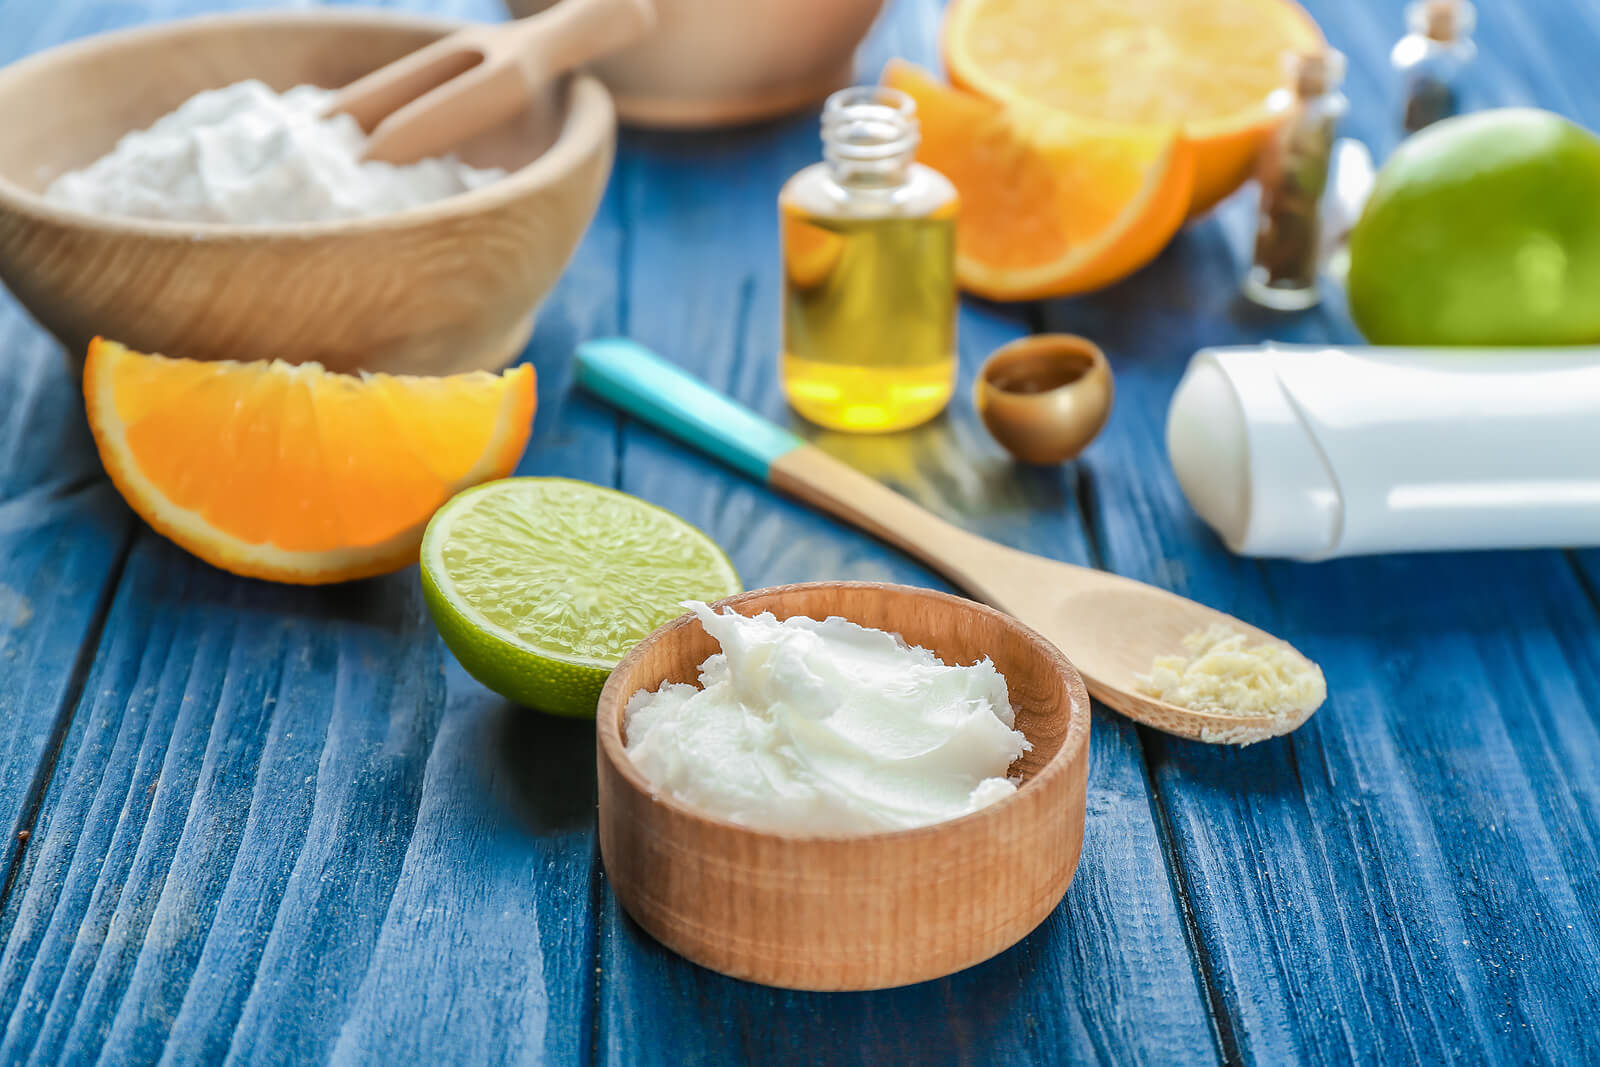 A selection of ingredients for making natural deodorant at home.